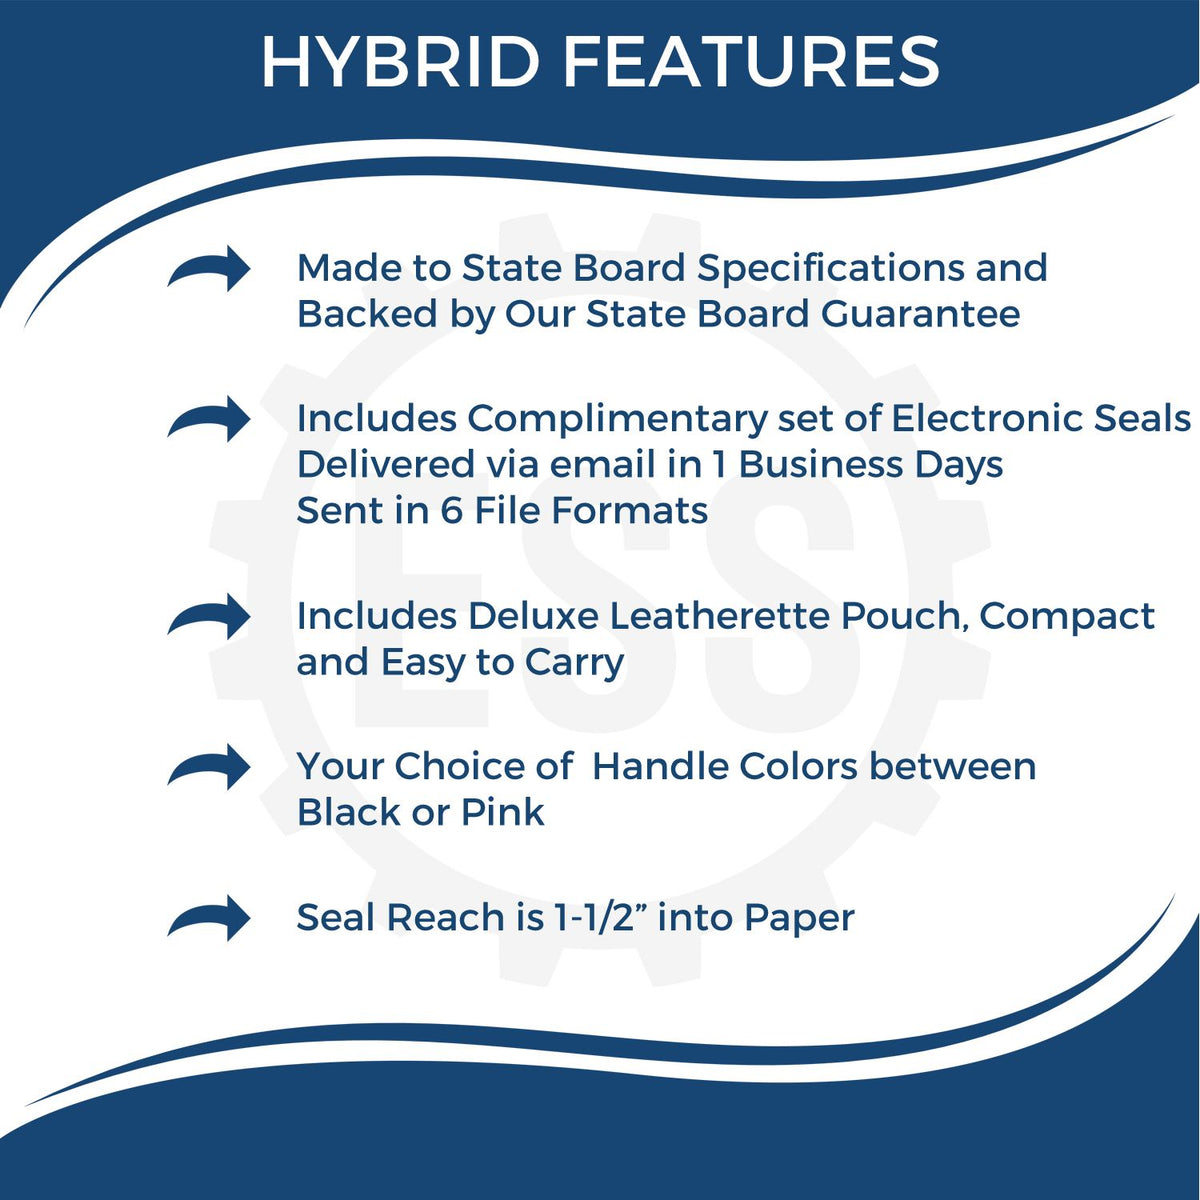 A picture of an infographic highlighting the selling points for the Hybrid Louisiana Engineer Seal